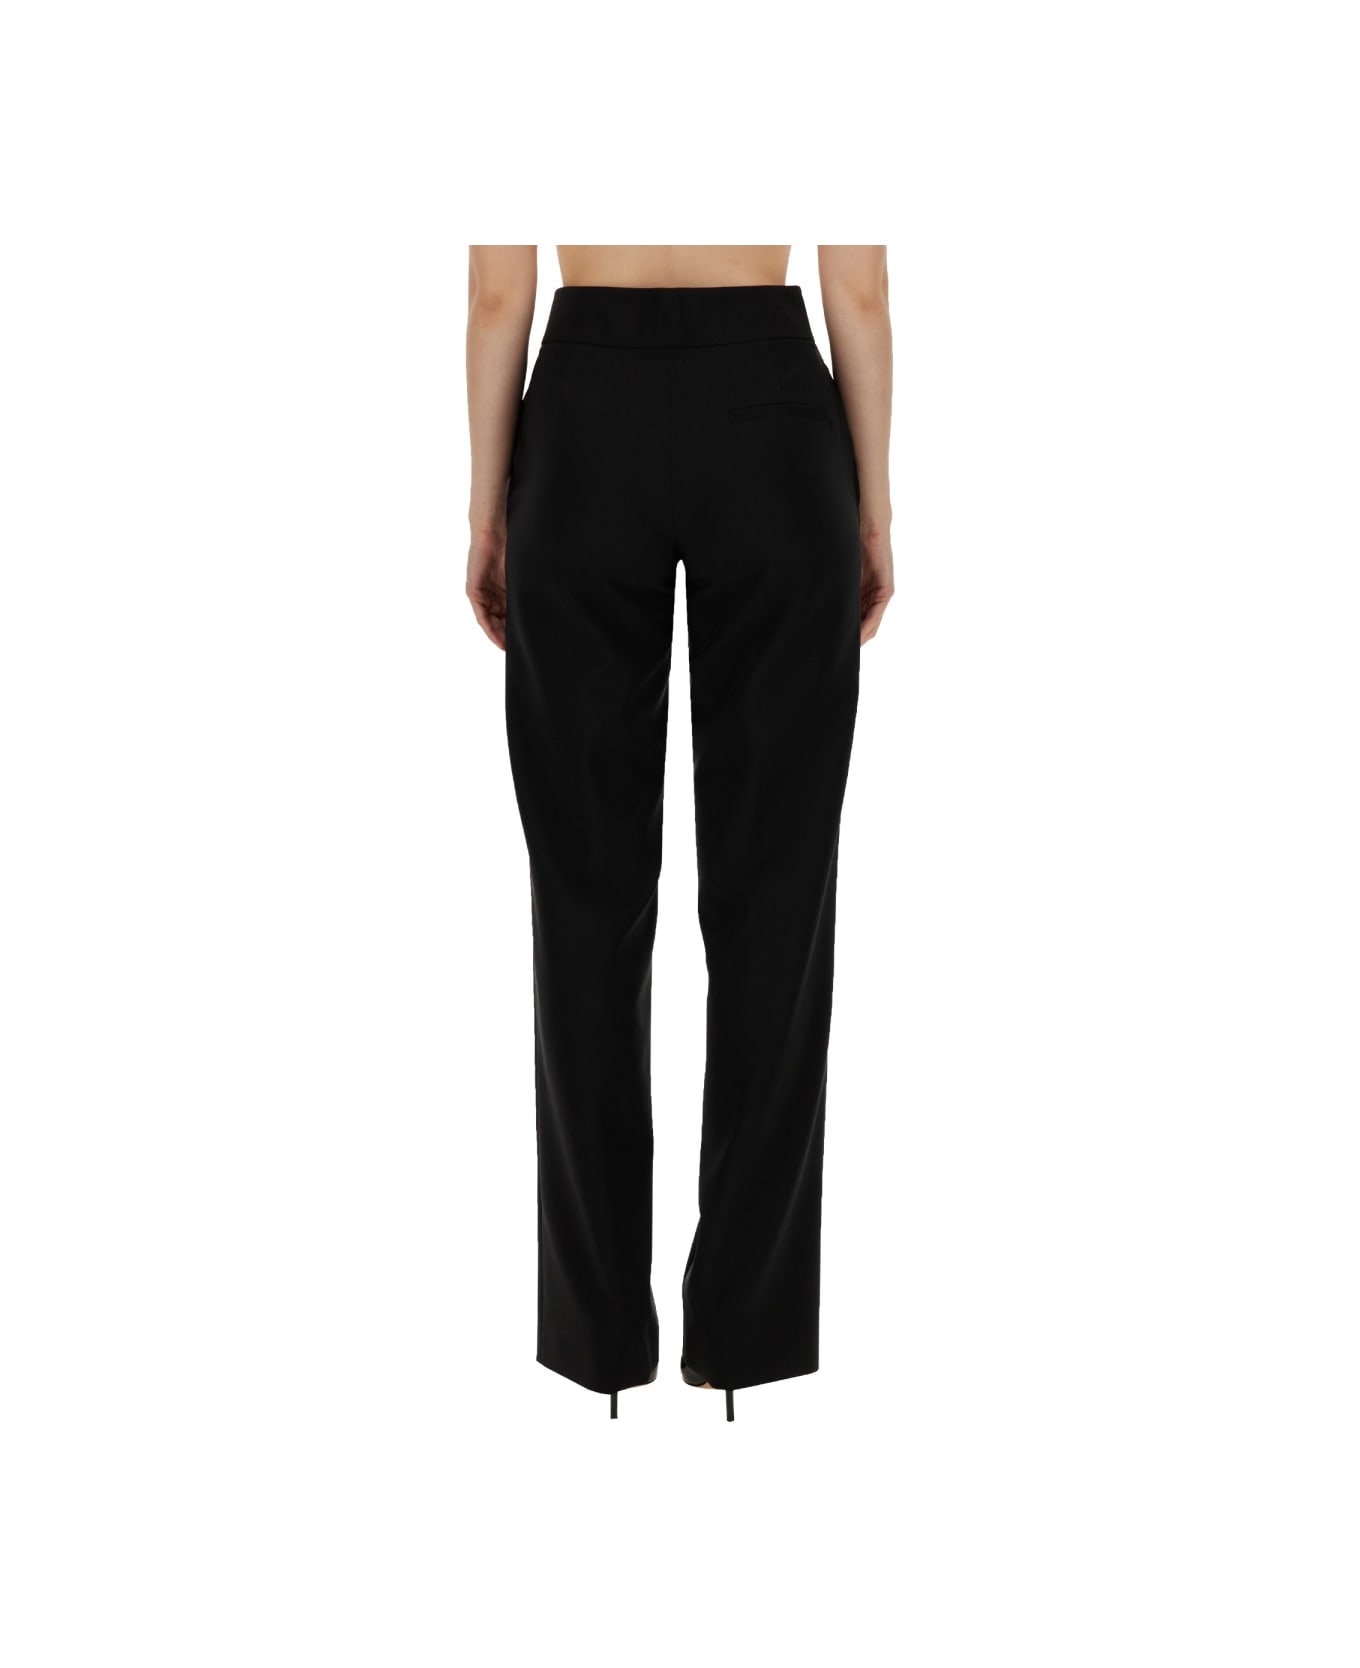 Genny Tailored Pants - BLACK ボトムス